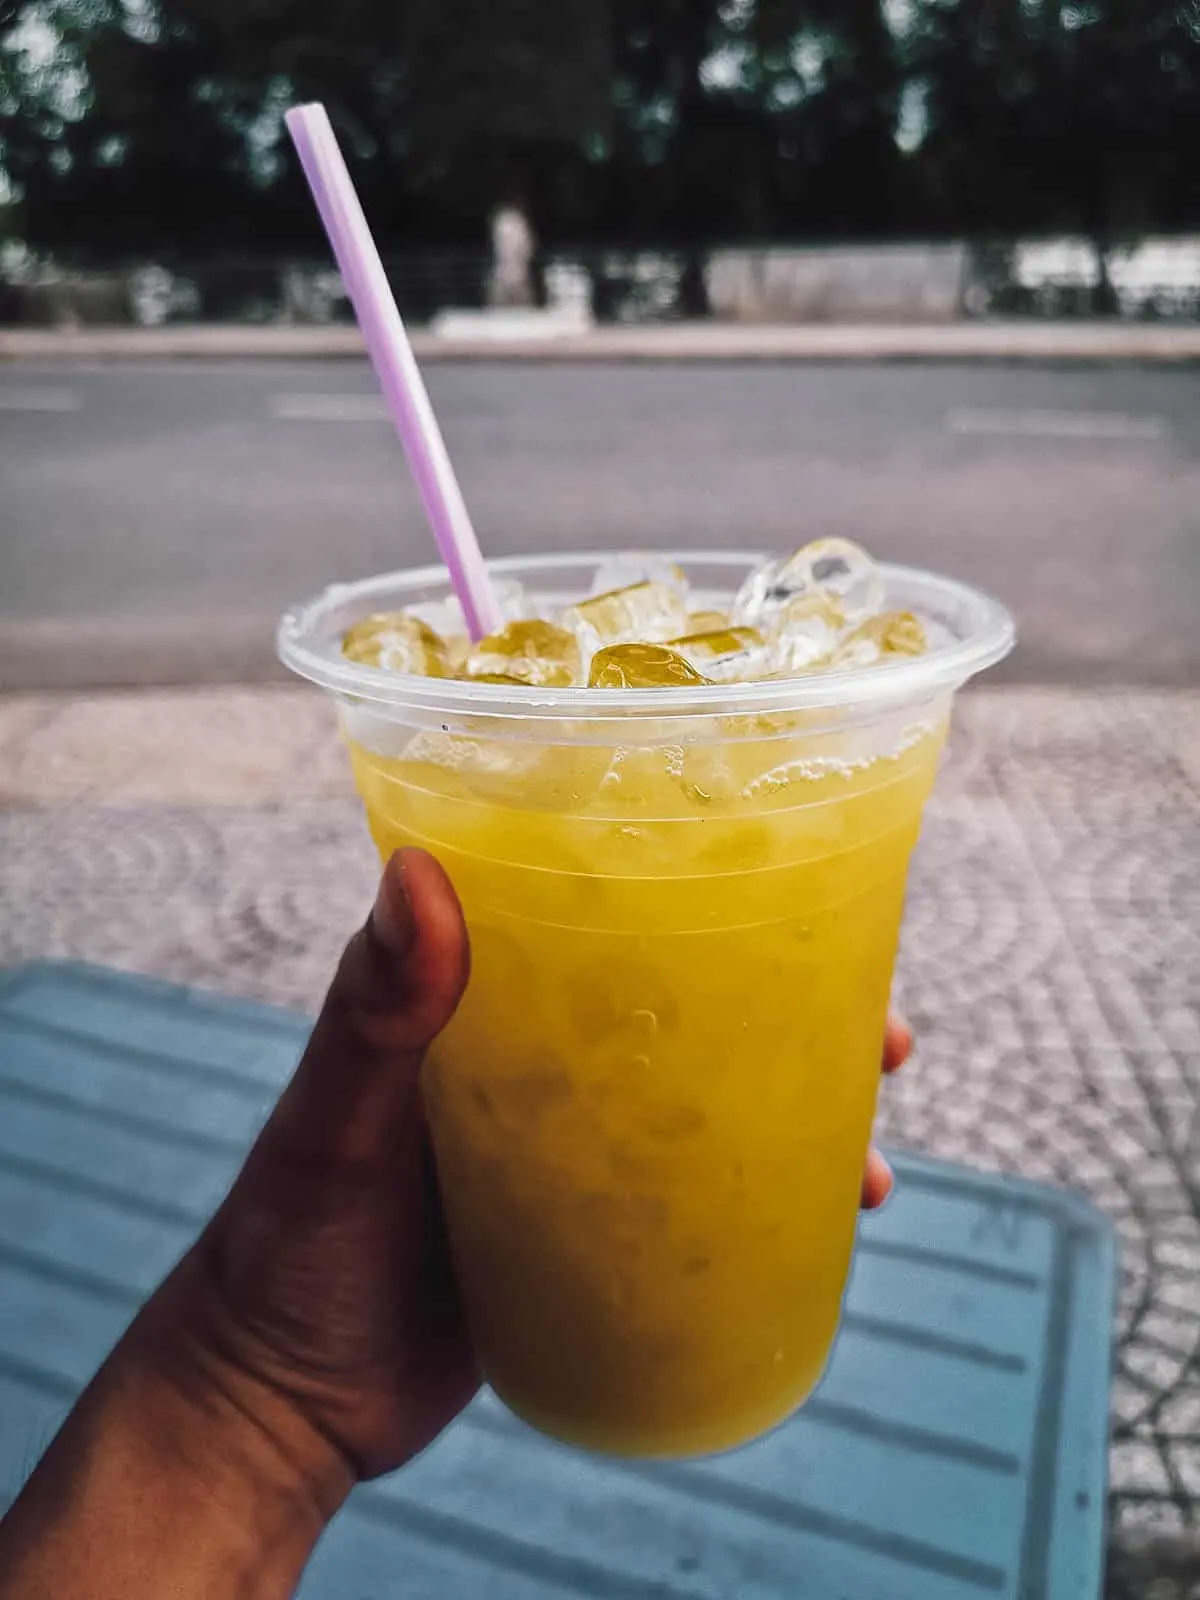 Nuoc mia in Ben Tre, a refreshing Vietnamese drink made with sugar cane juice